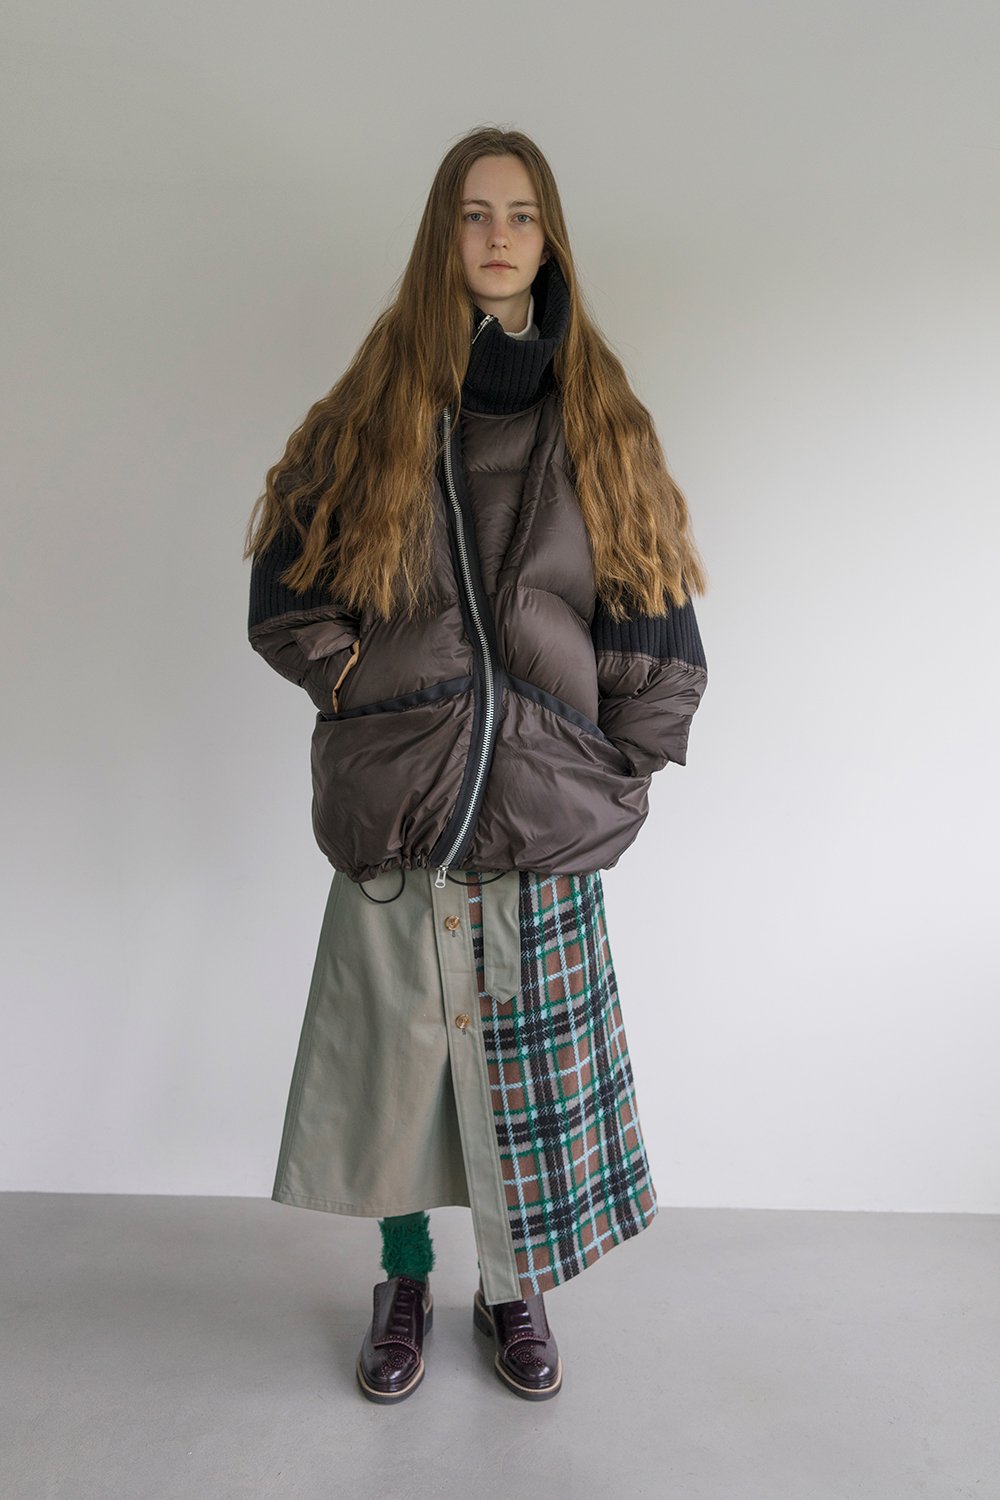 Function Focused Outerwear from ZUCCa Autumn/Winter ' — eye C